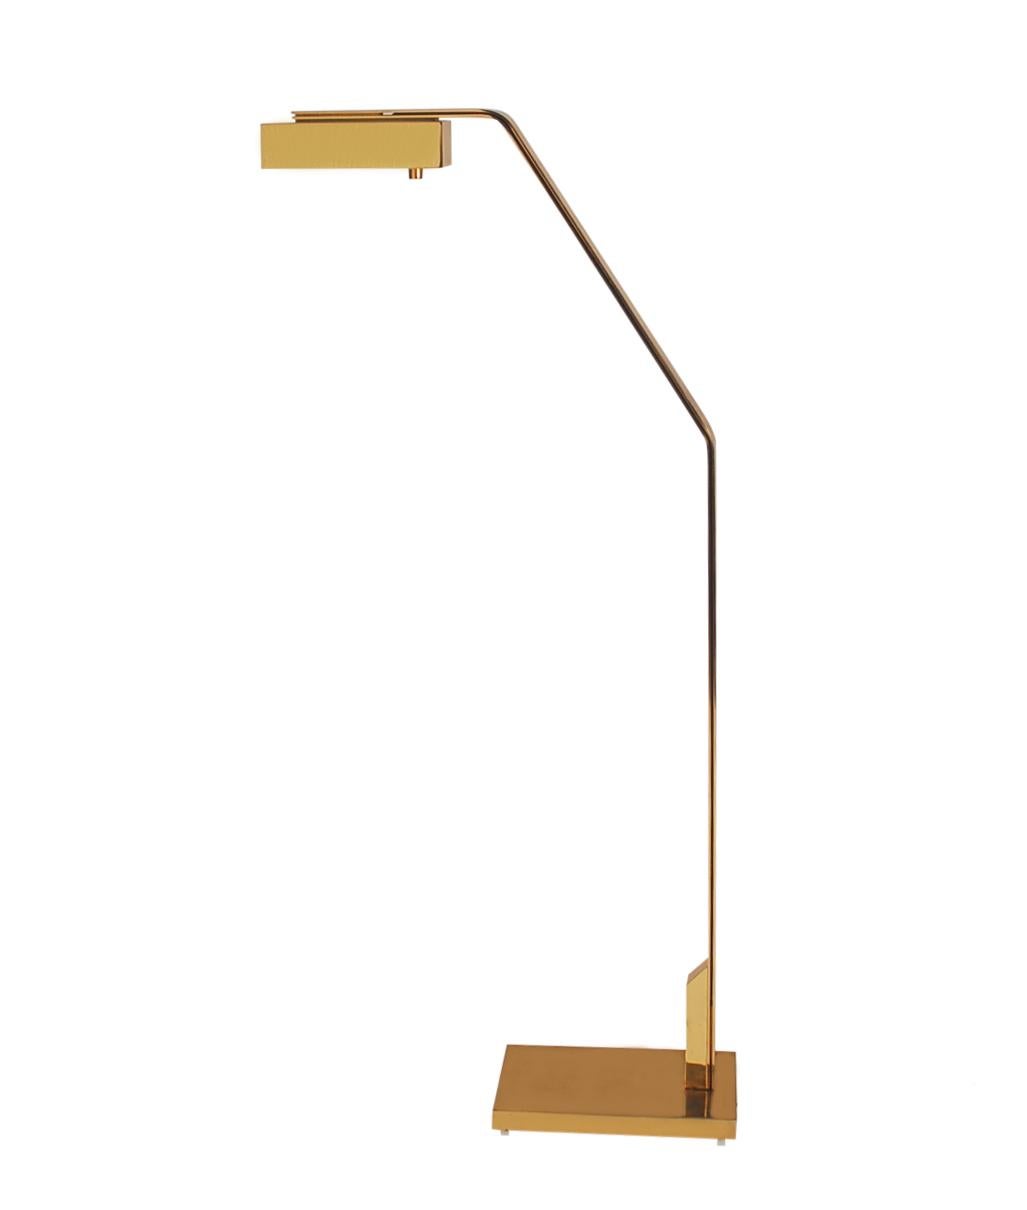 Pair of Midcentury Italian Modern Polished Brass Reading Floor Lamps by Casella 4